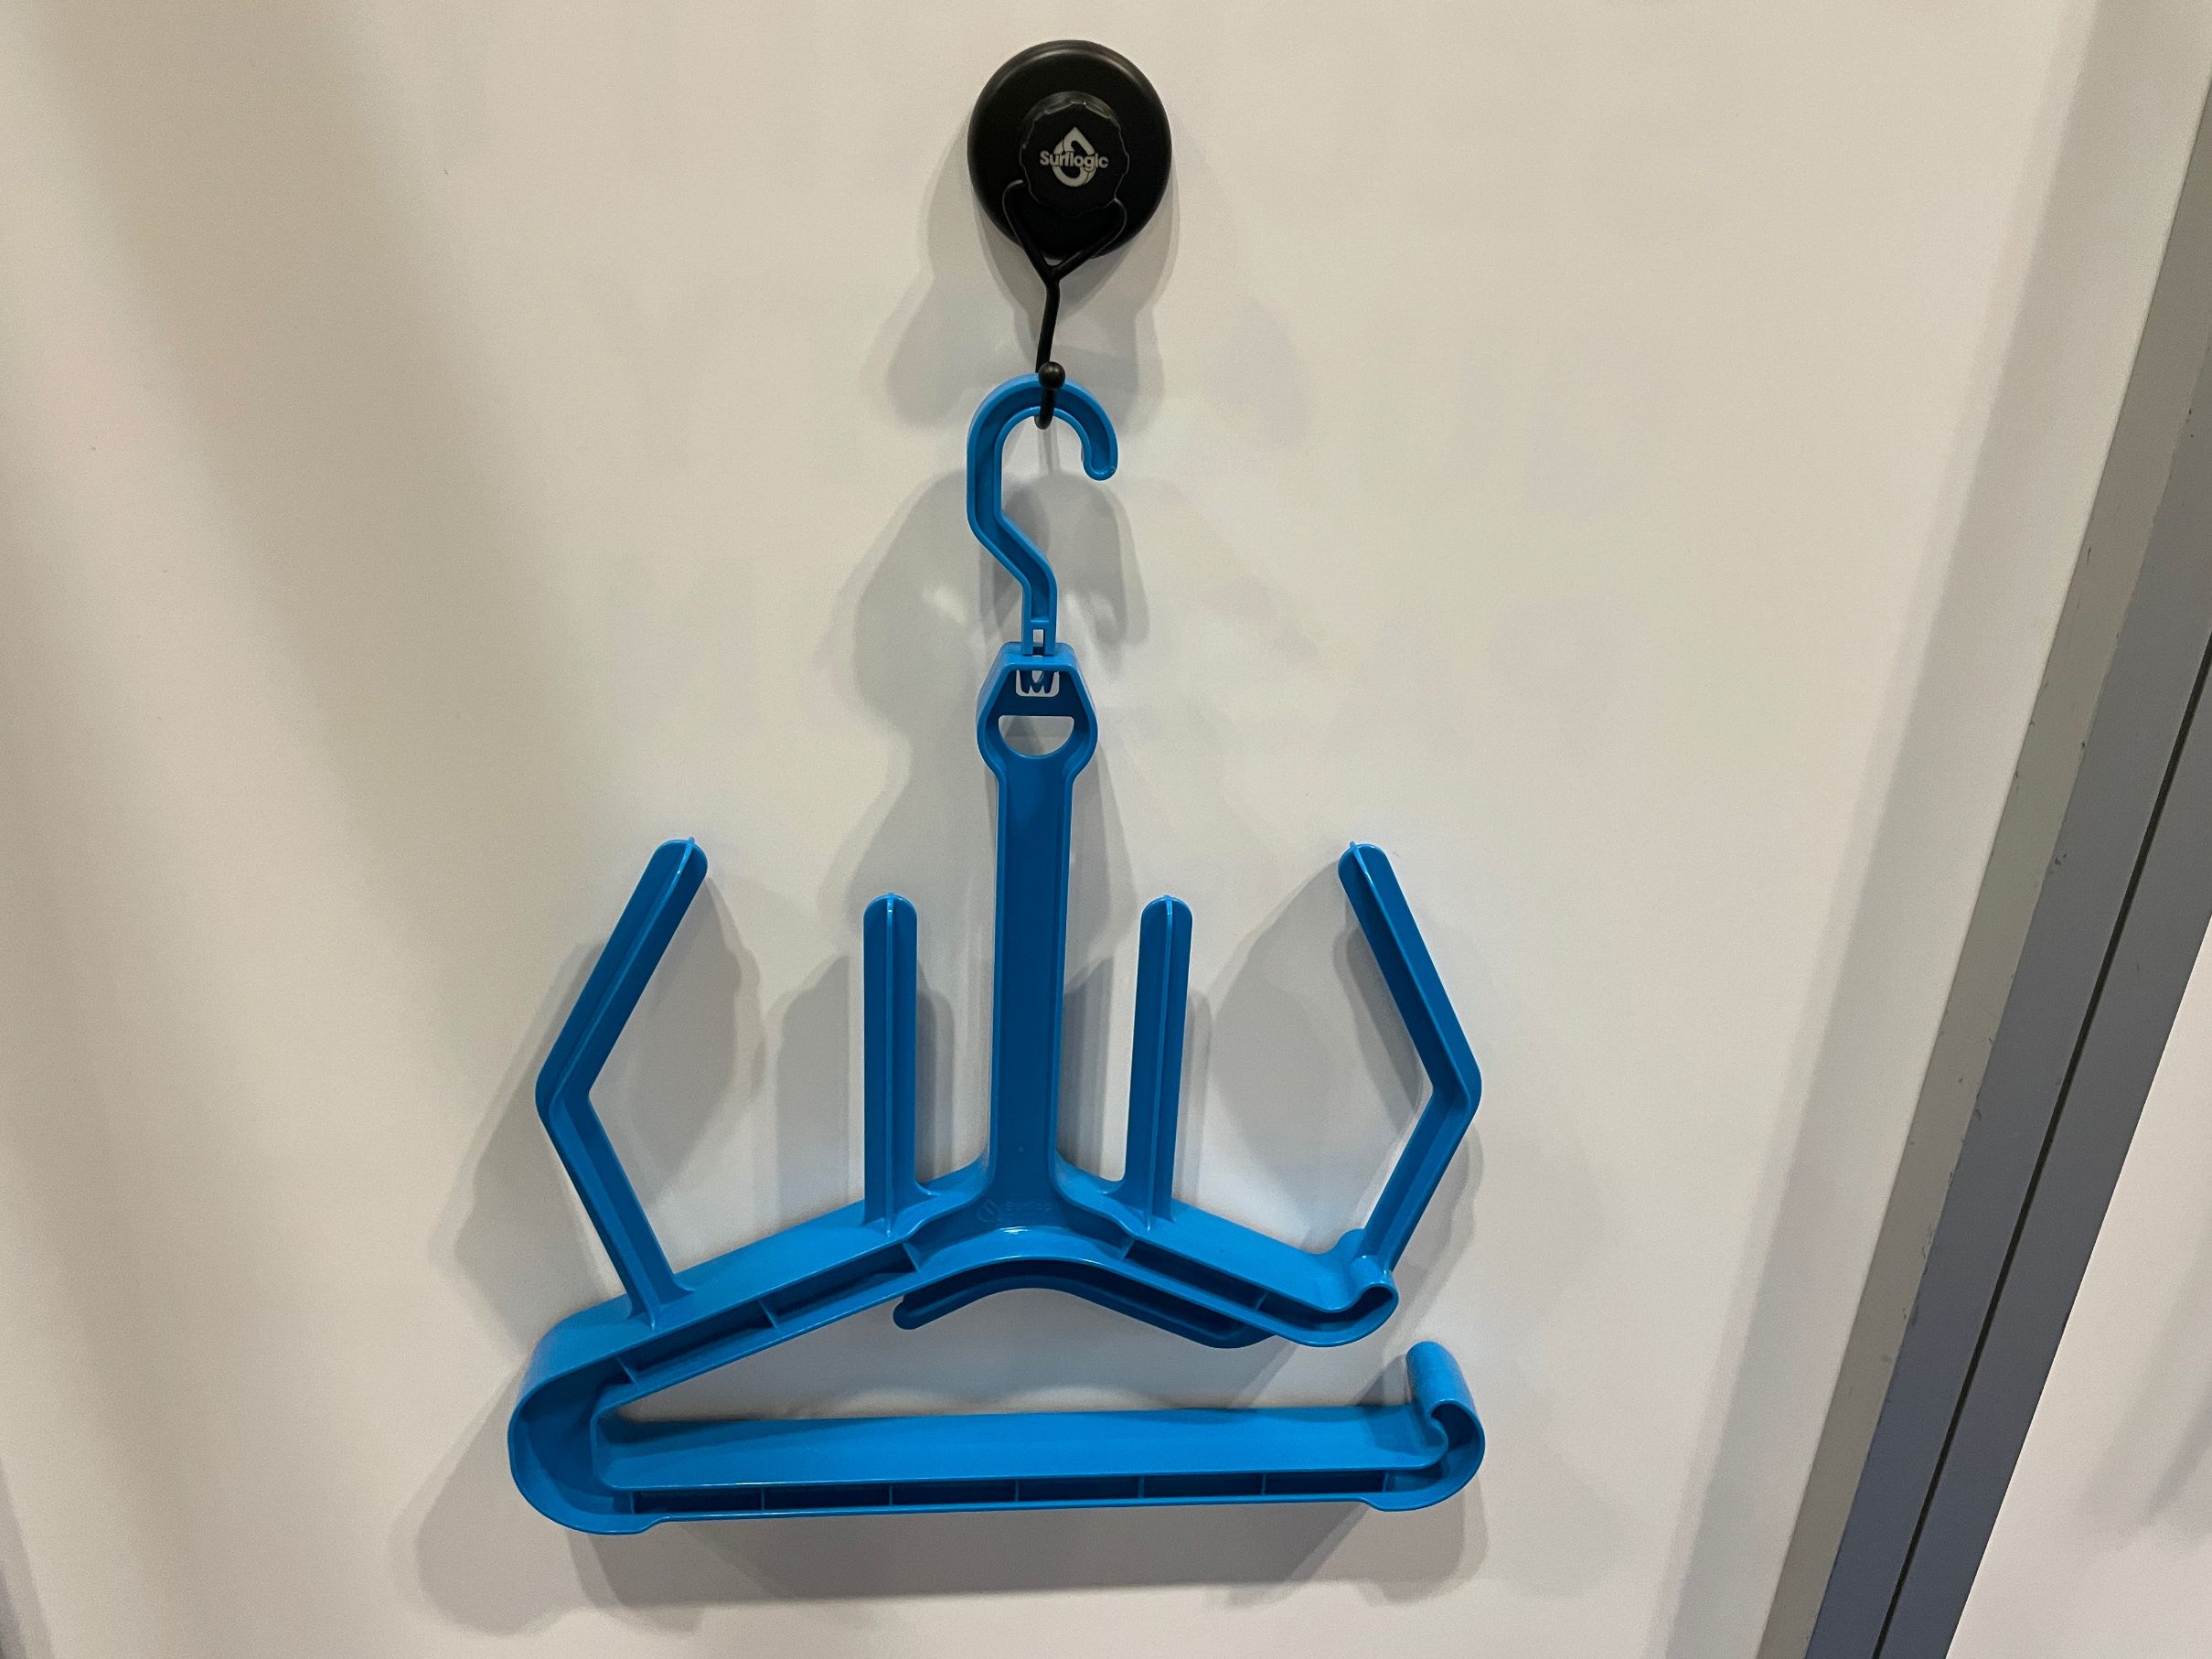 Surf Logic’s wetsuit hanger Maxie to hang all your gear